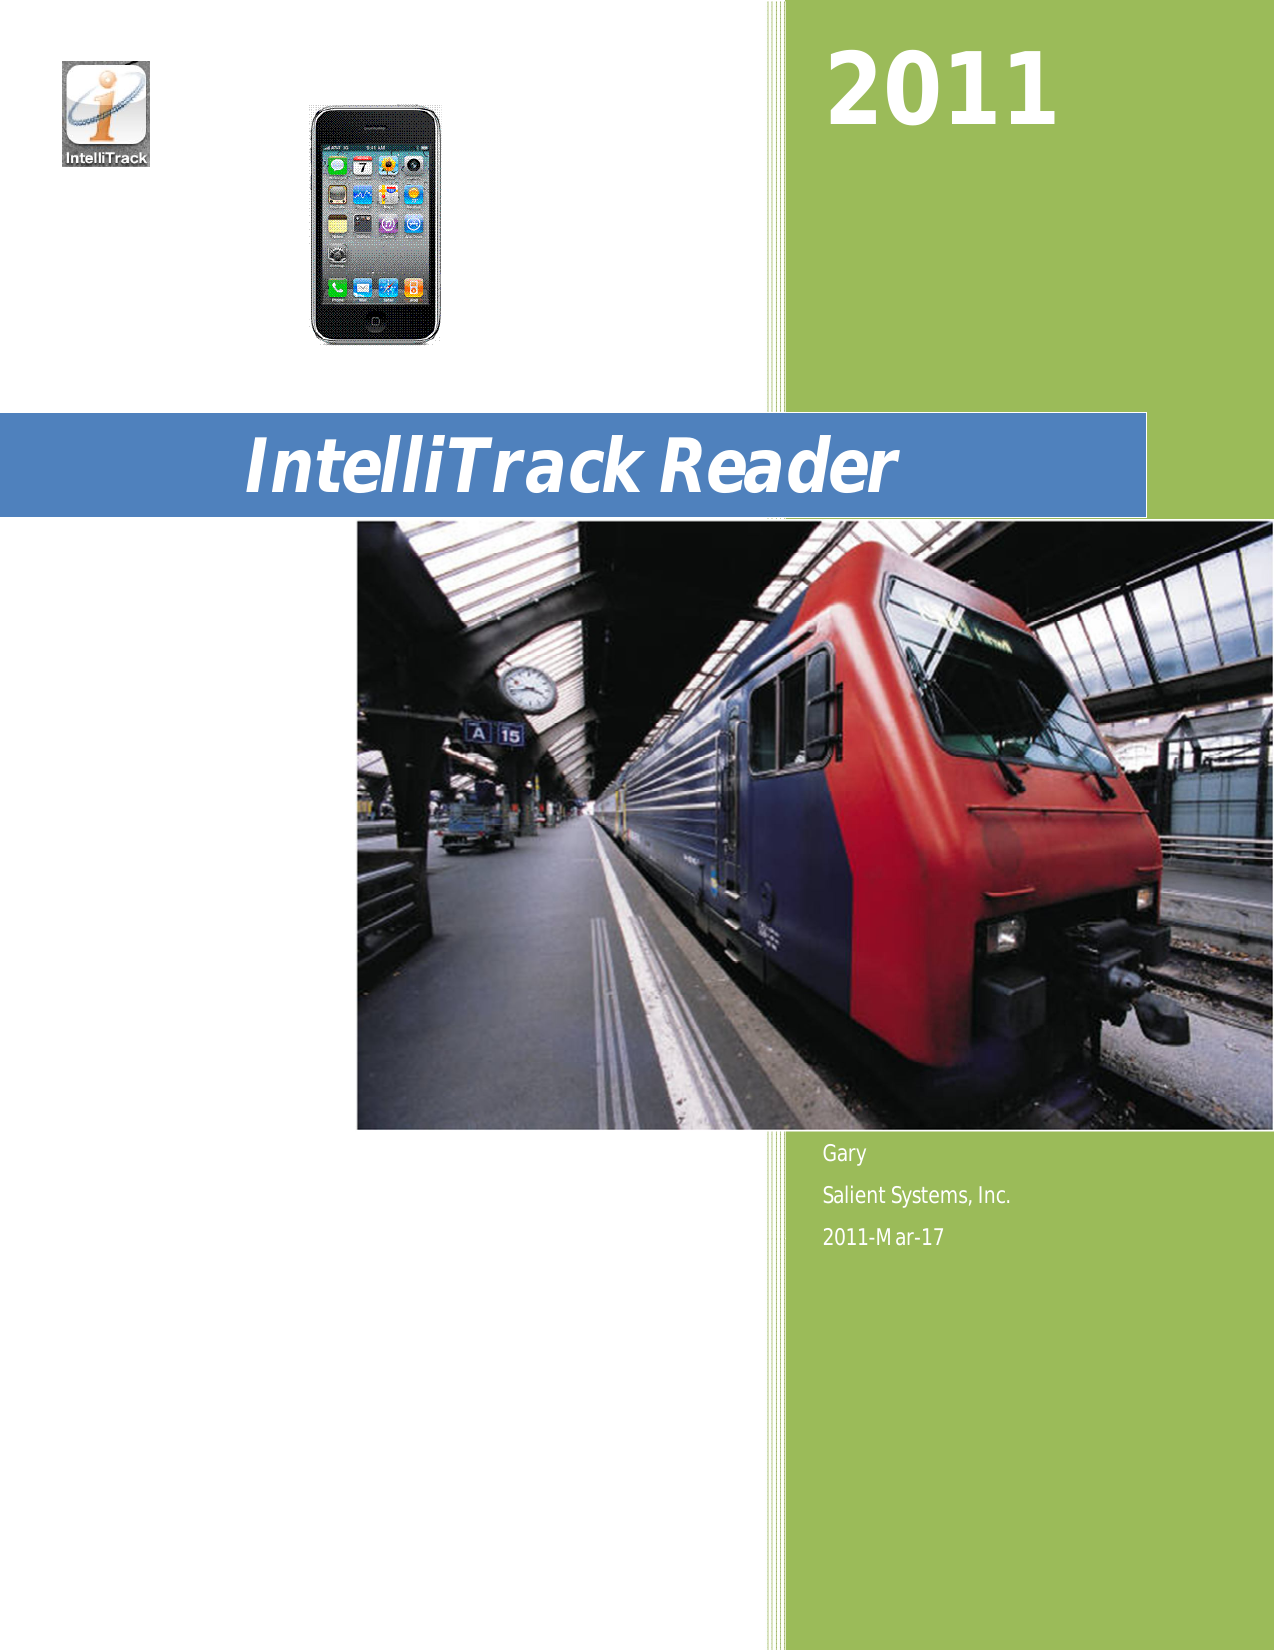                                   2011 Gary Salient Systems, Inc. 2011-Mar-17 IntelliTrack Reader 